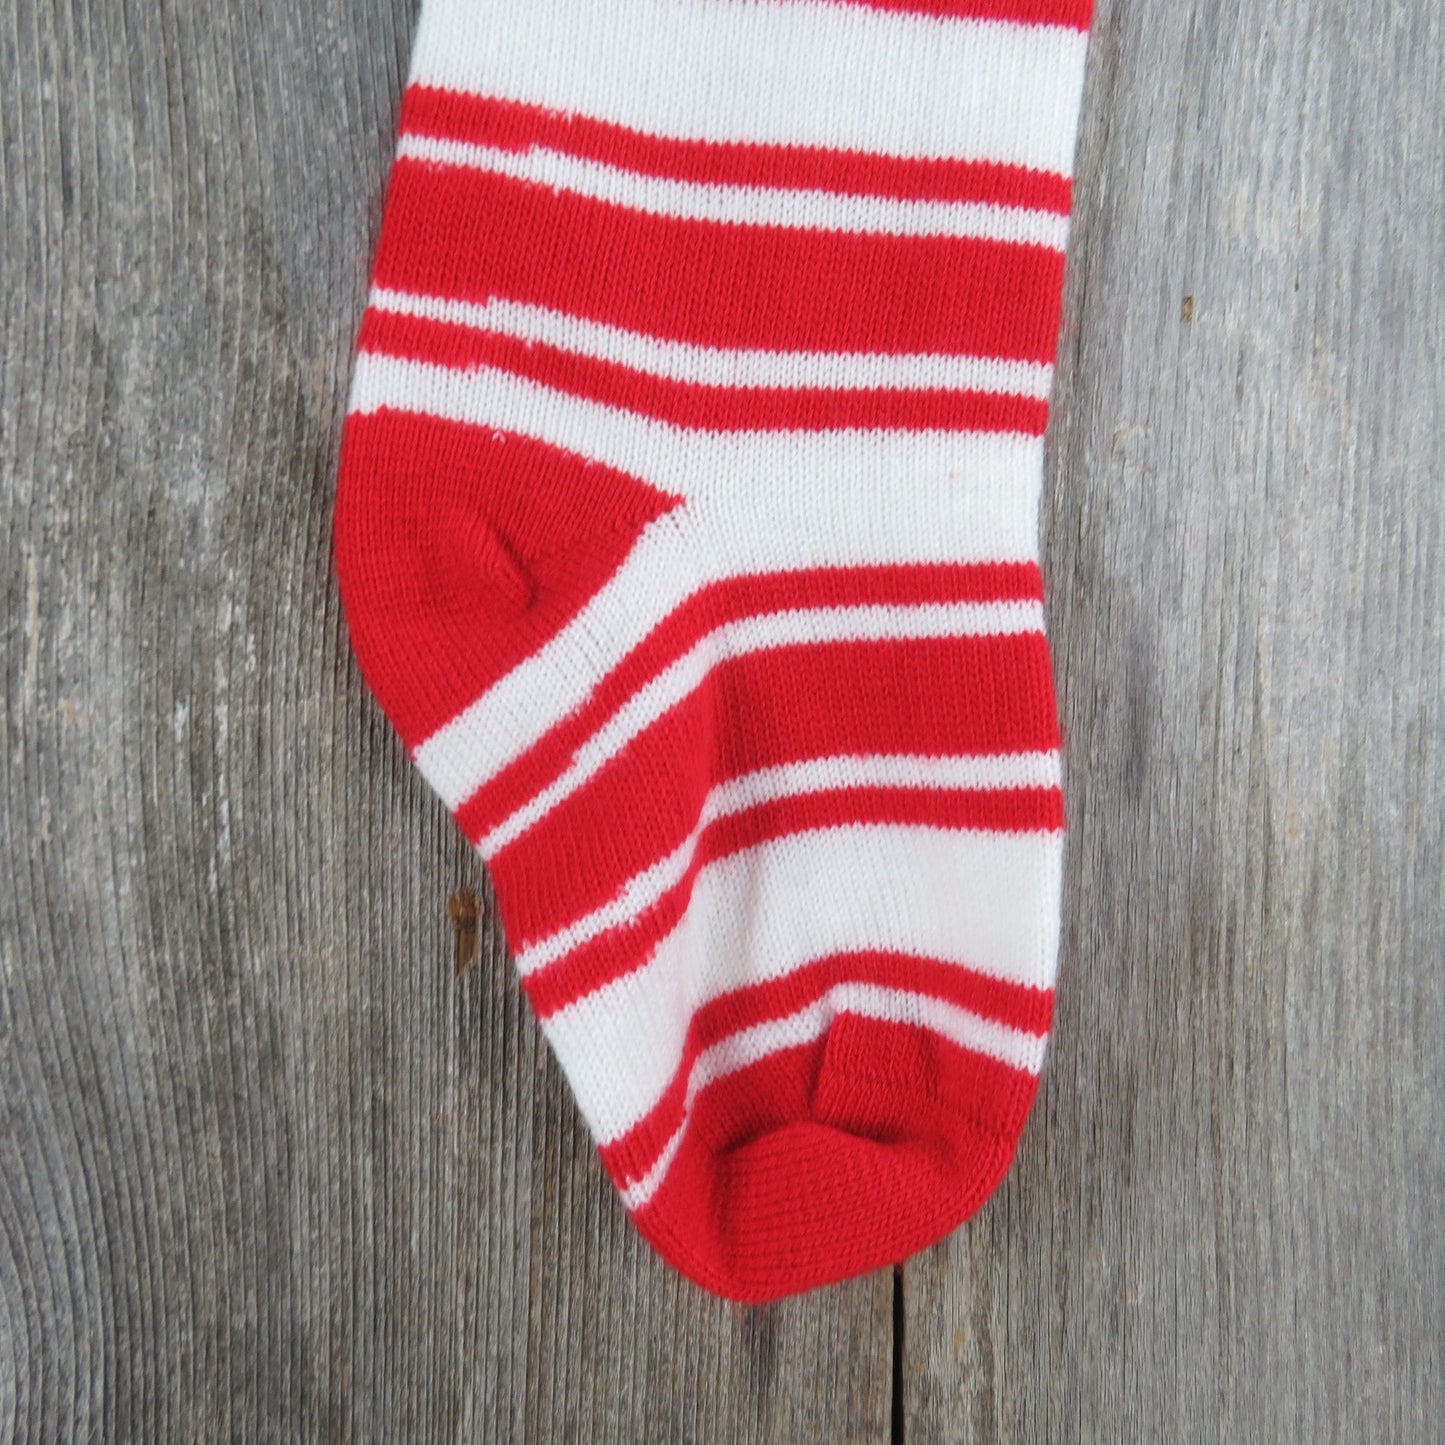 Vintage Candy Cane Striped Stocking Red White Knit Kurt Adler 1983 Christmas Knitted ST361